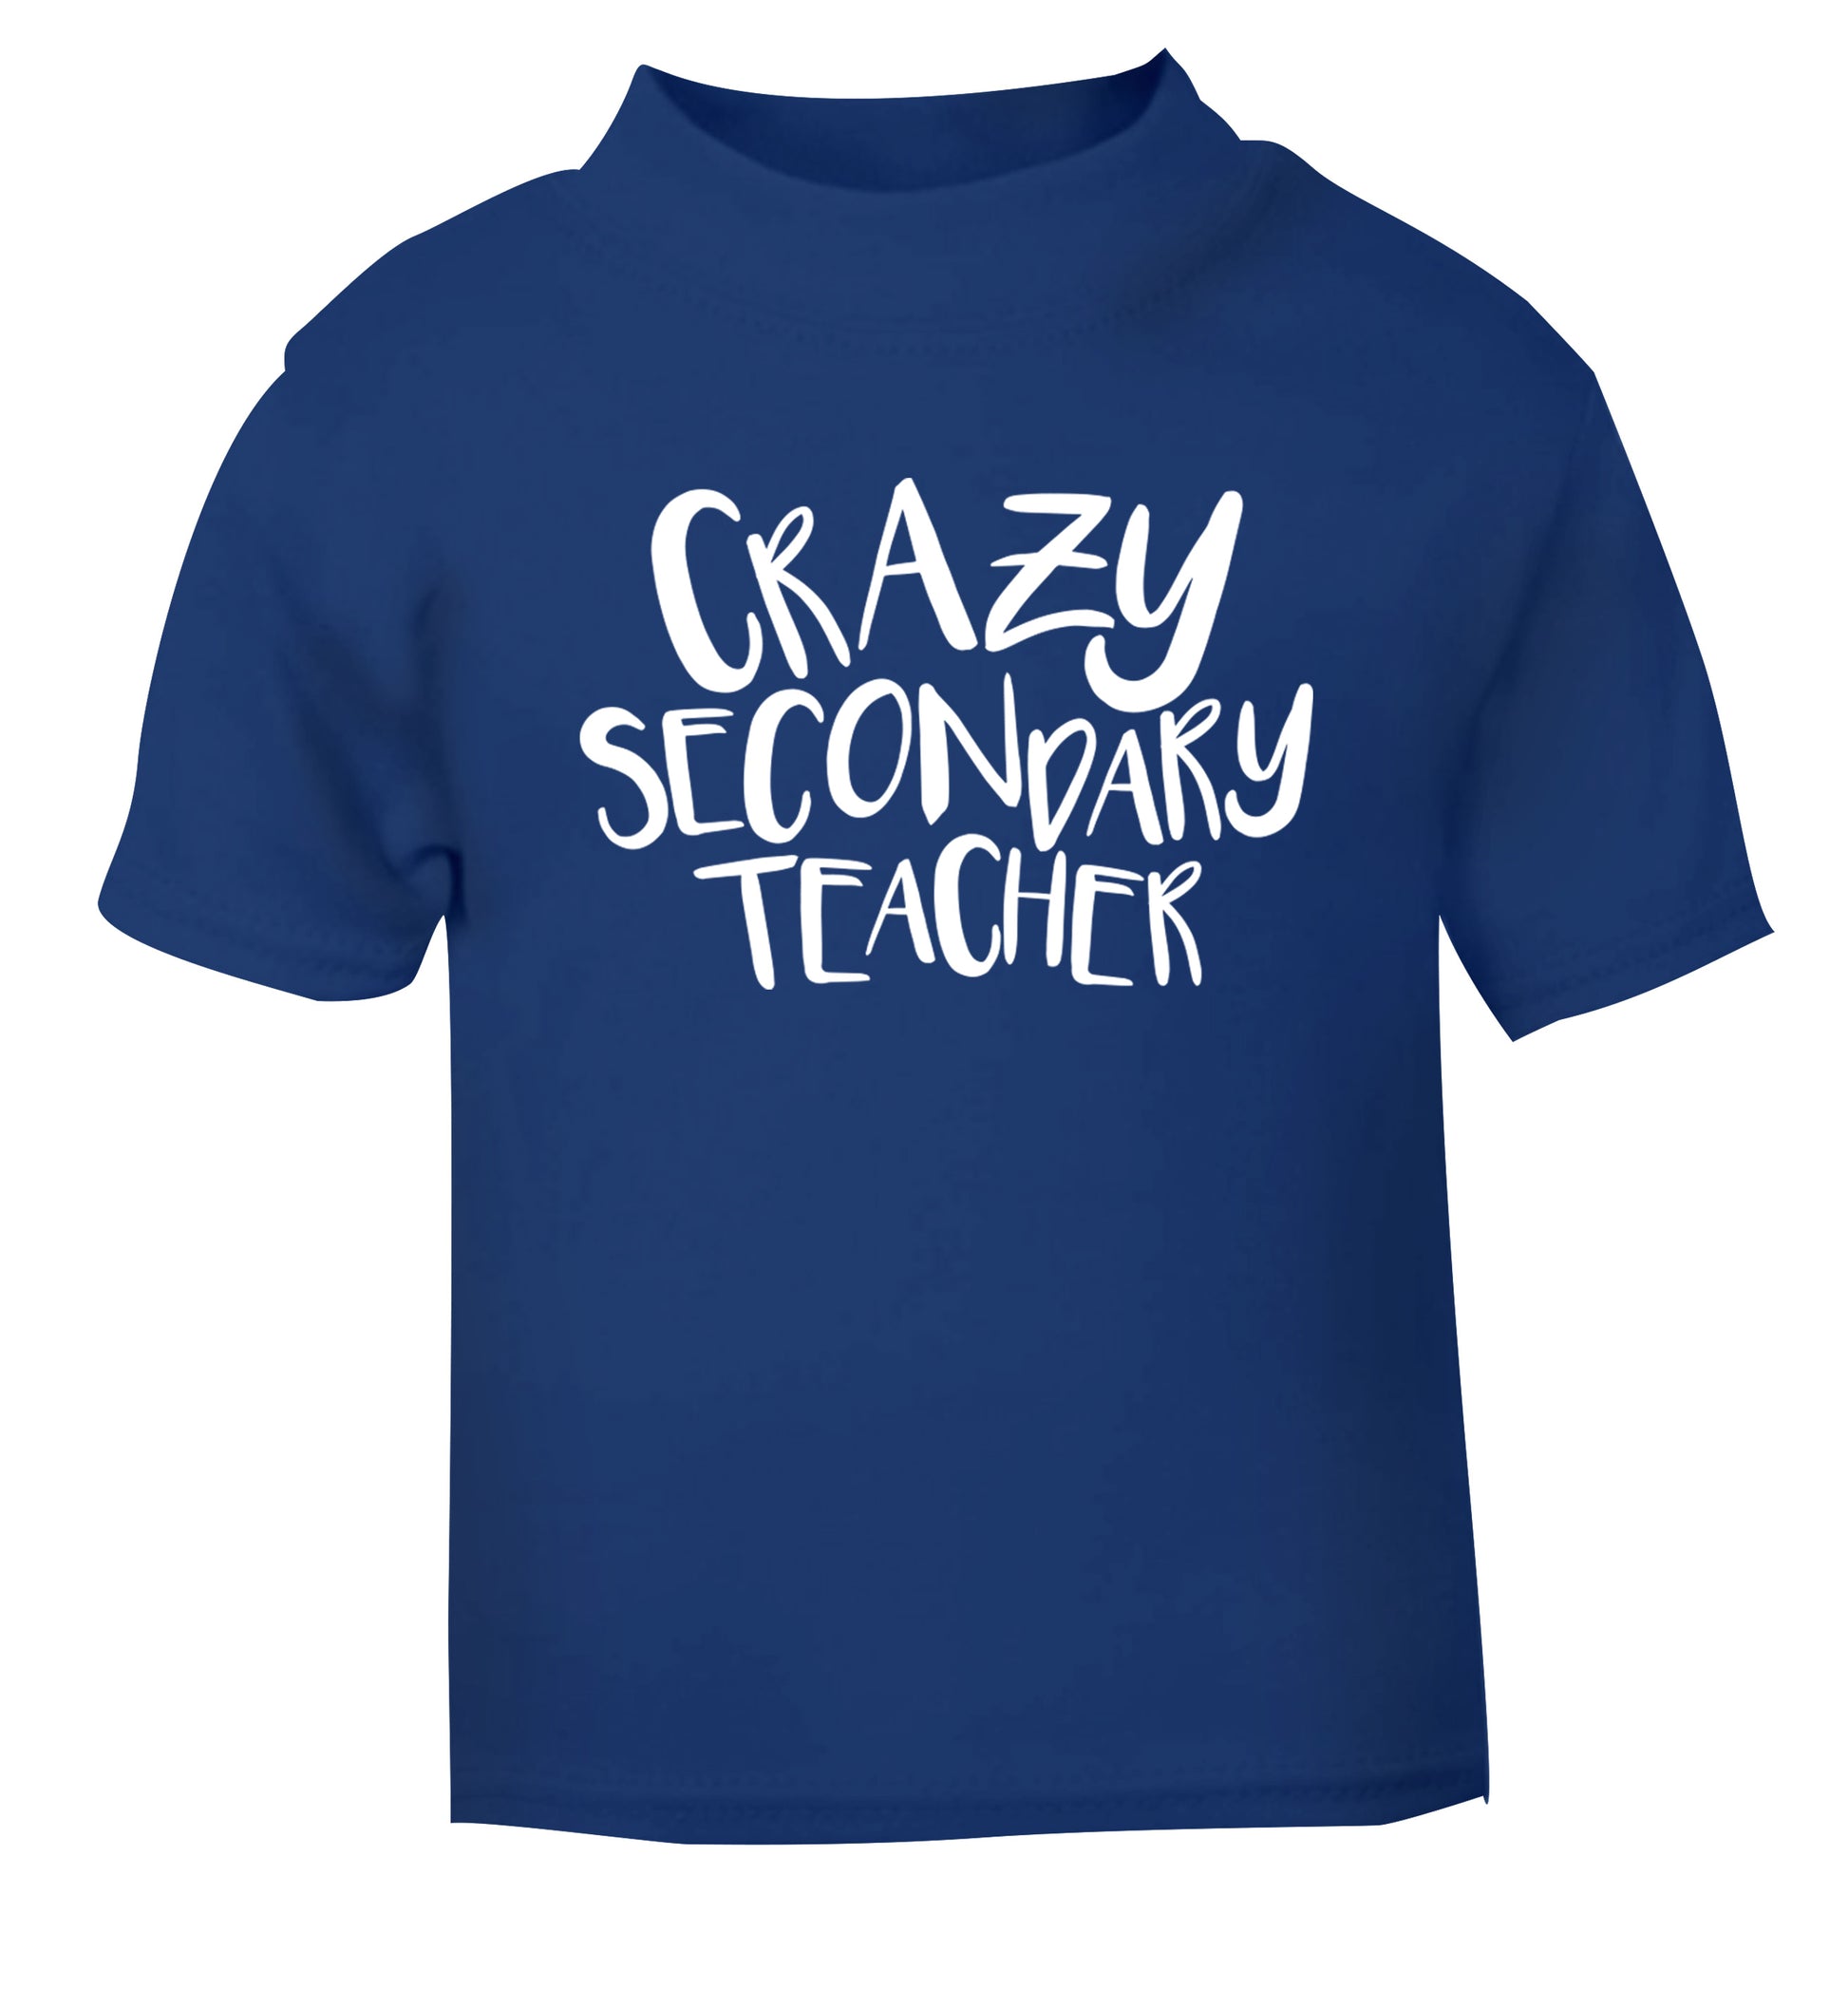 Crazy secondary teacher blue Baby Toddler Tshirt 2 Years